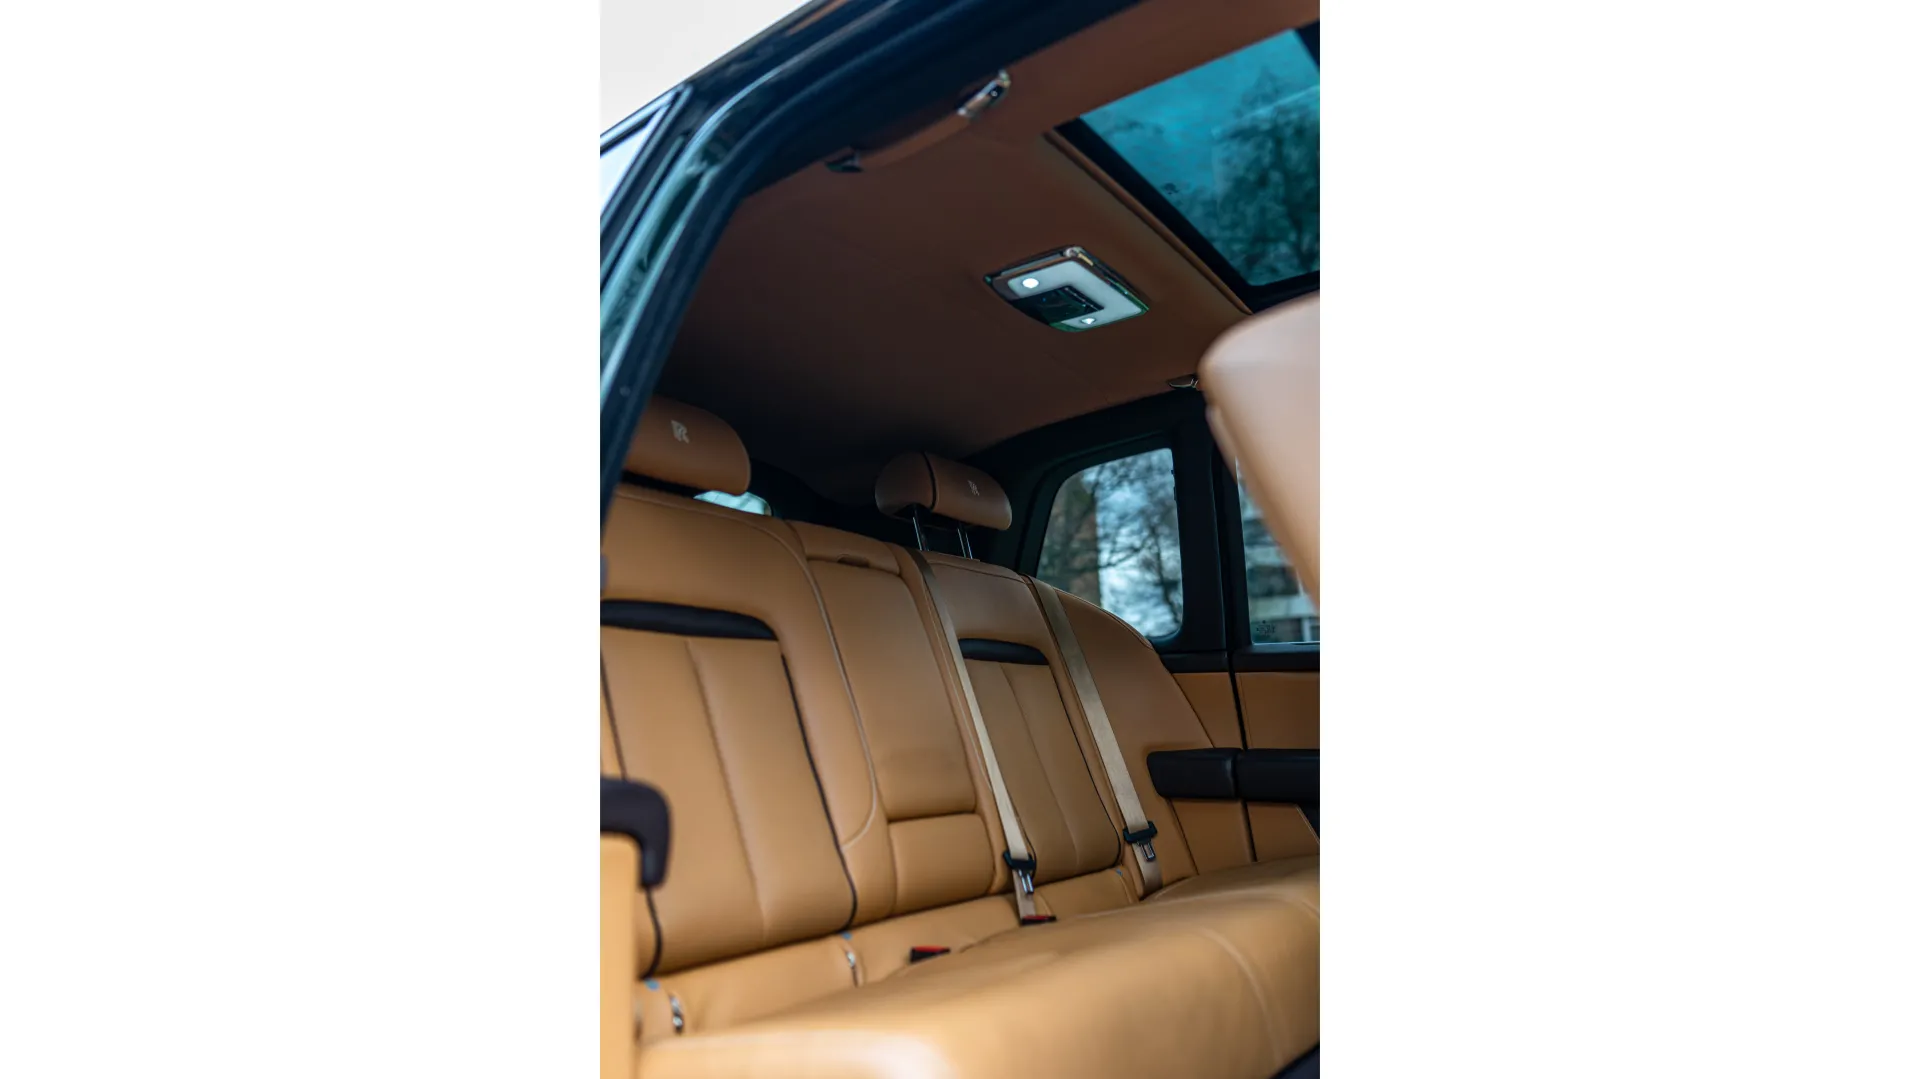 Rear Seats in A Rolls-Royce Cullinan with Tan Leather Interior and sunroof